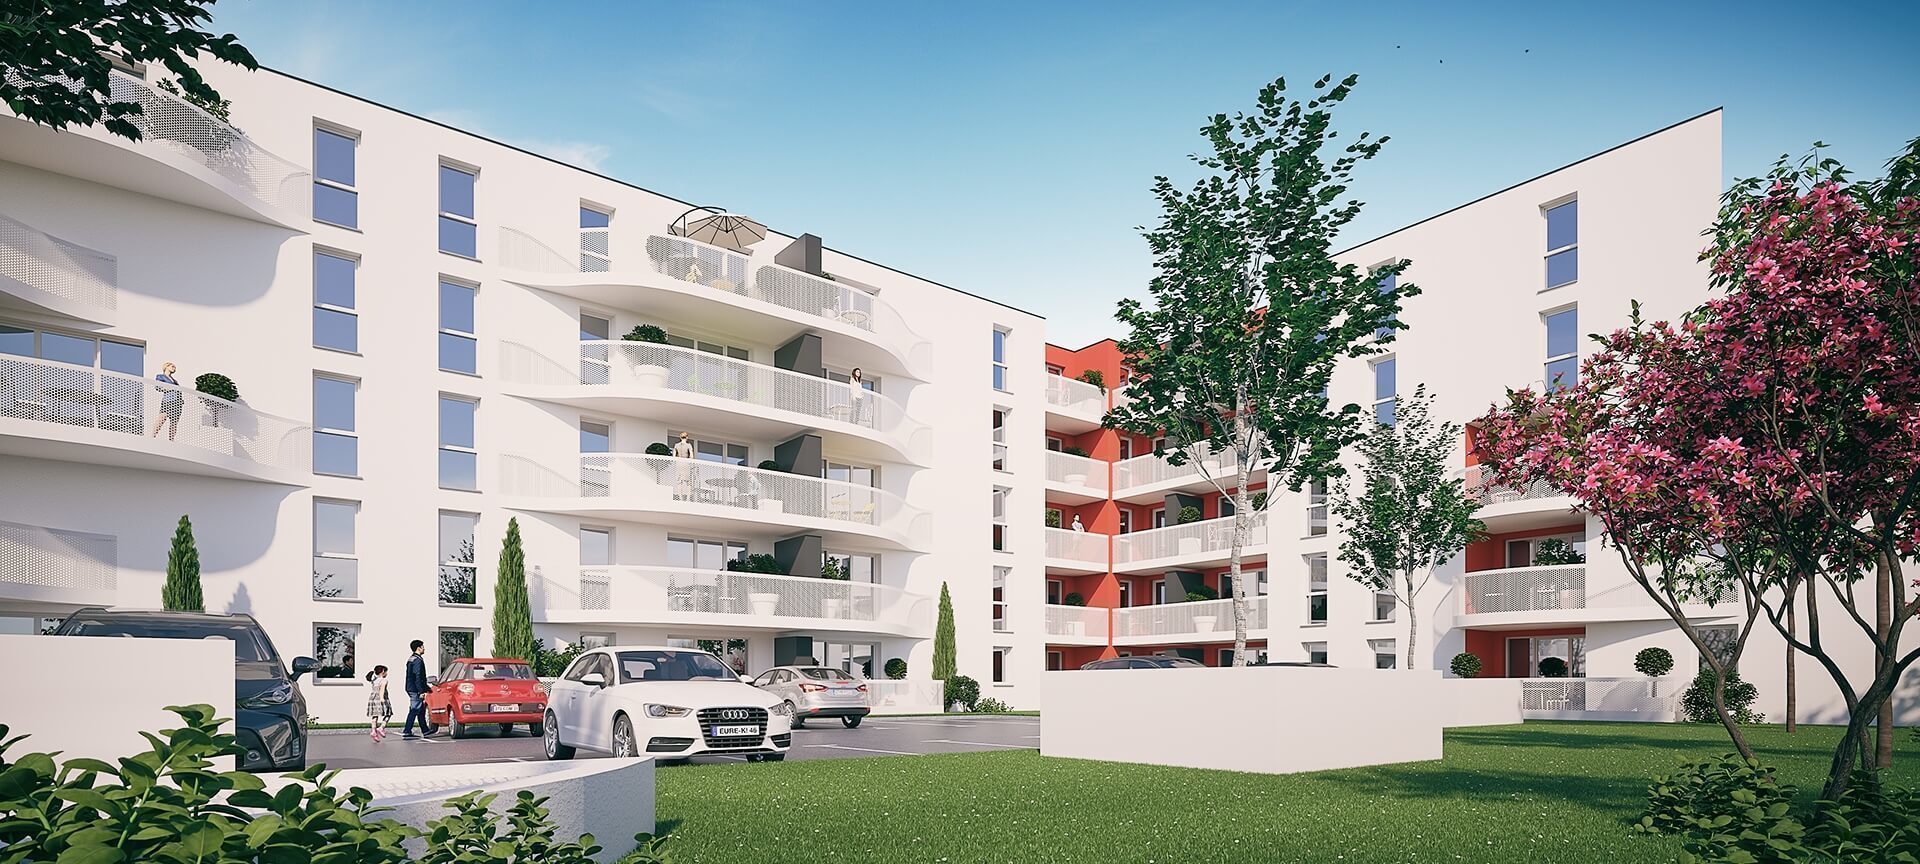 Edelis immobilier